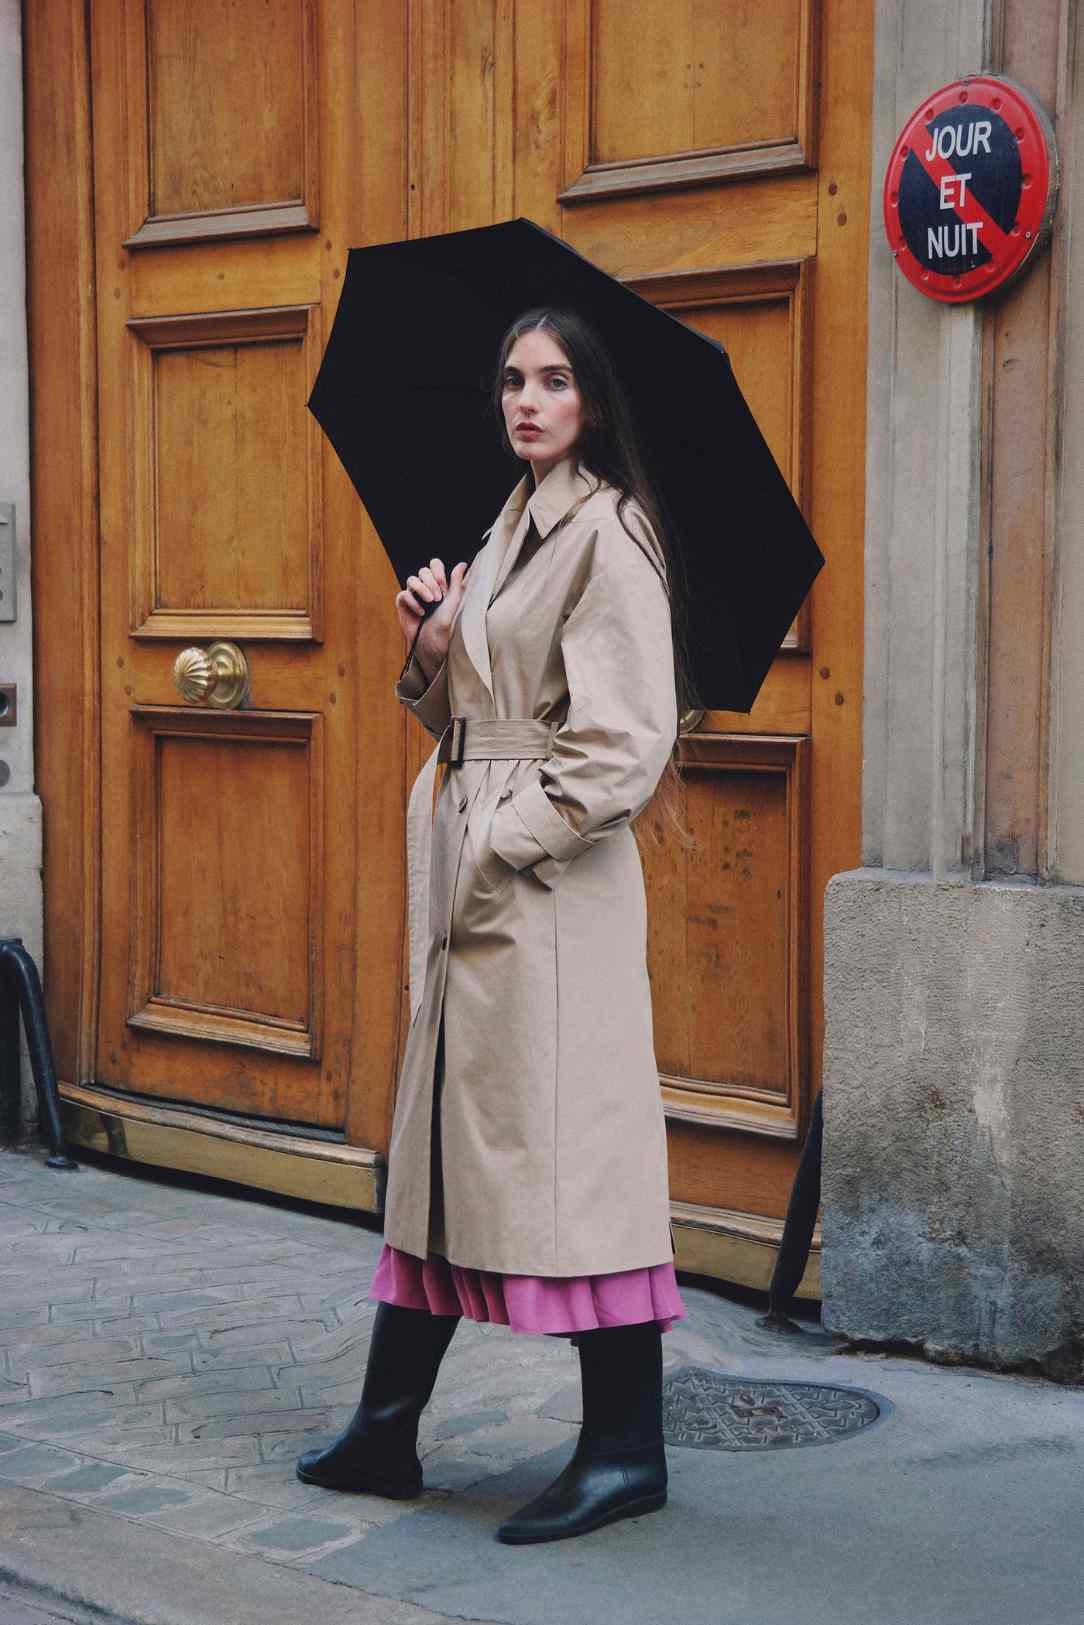 FRENCH WATERPROOF TRENCH COAT